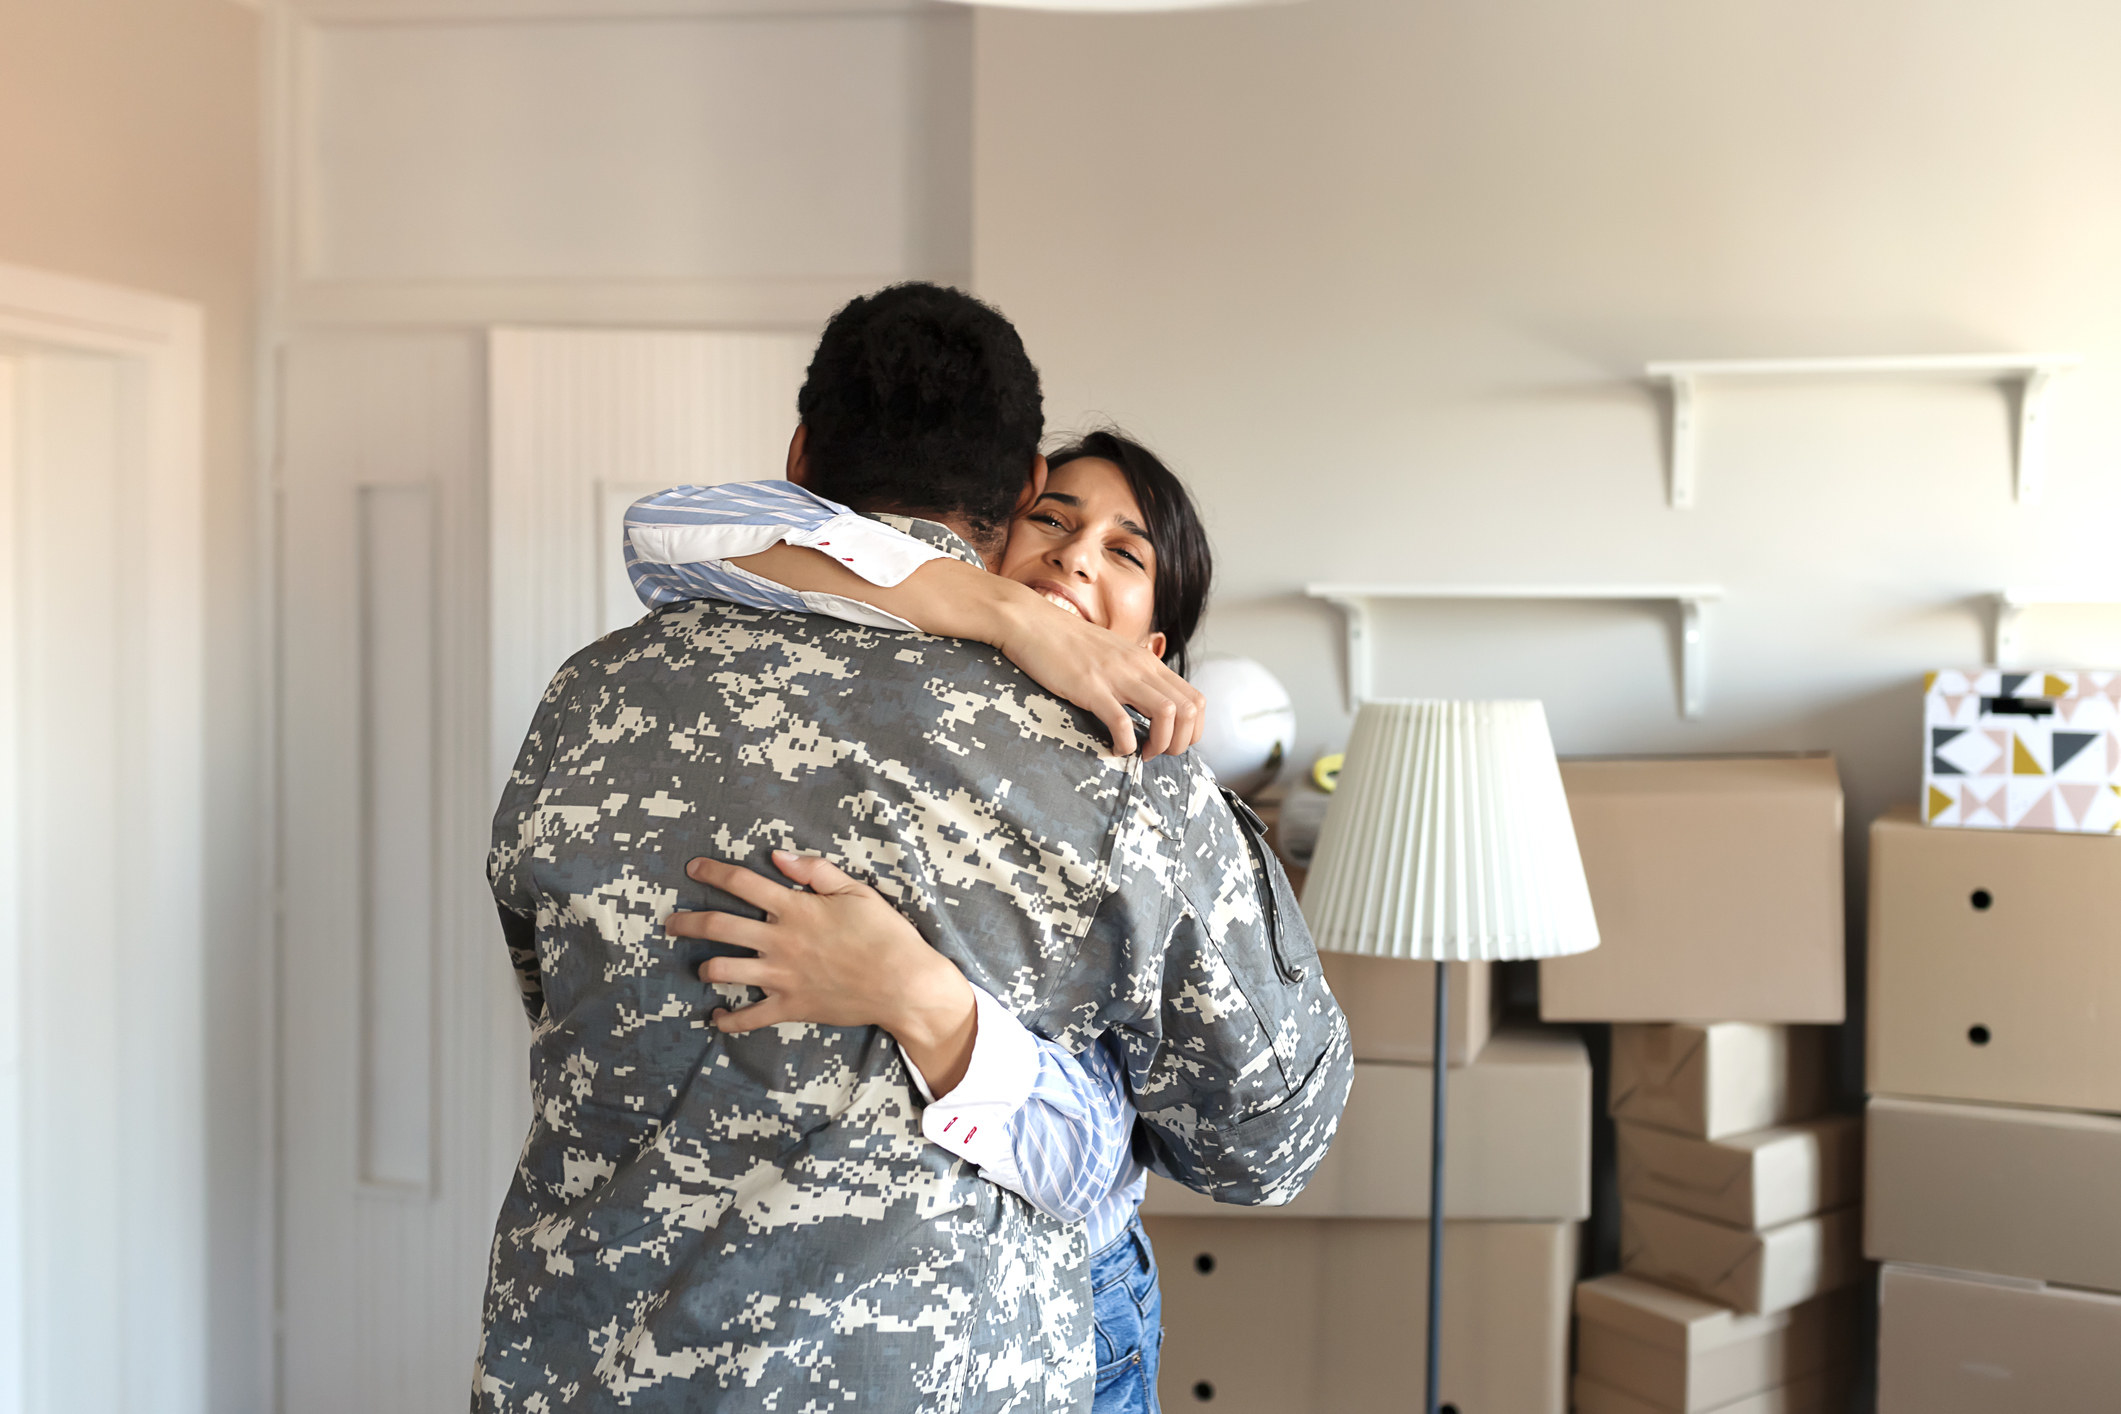 A man in military gear hugging a woman